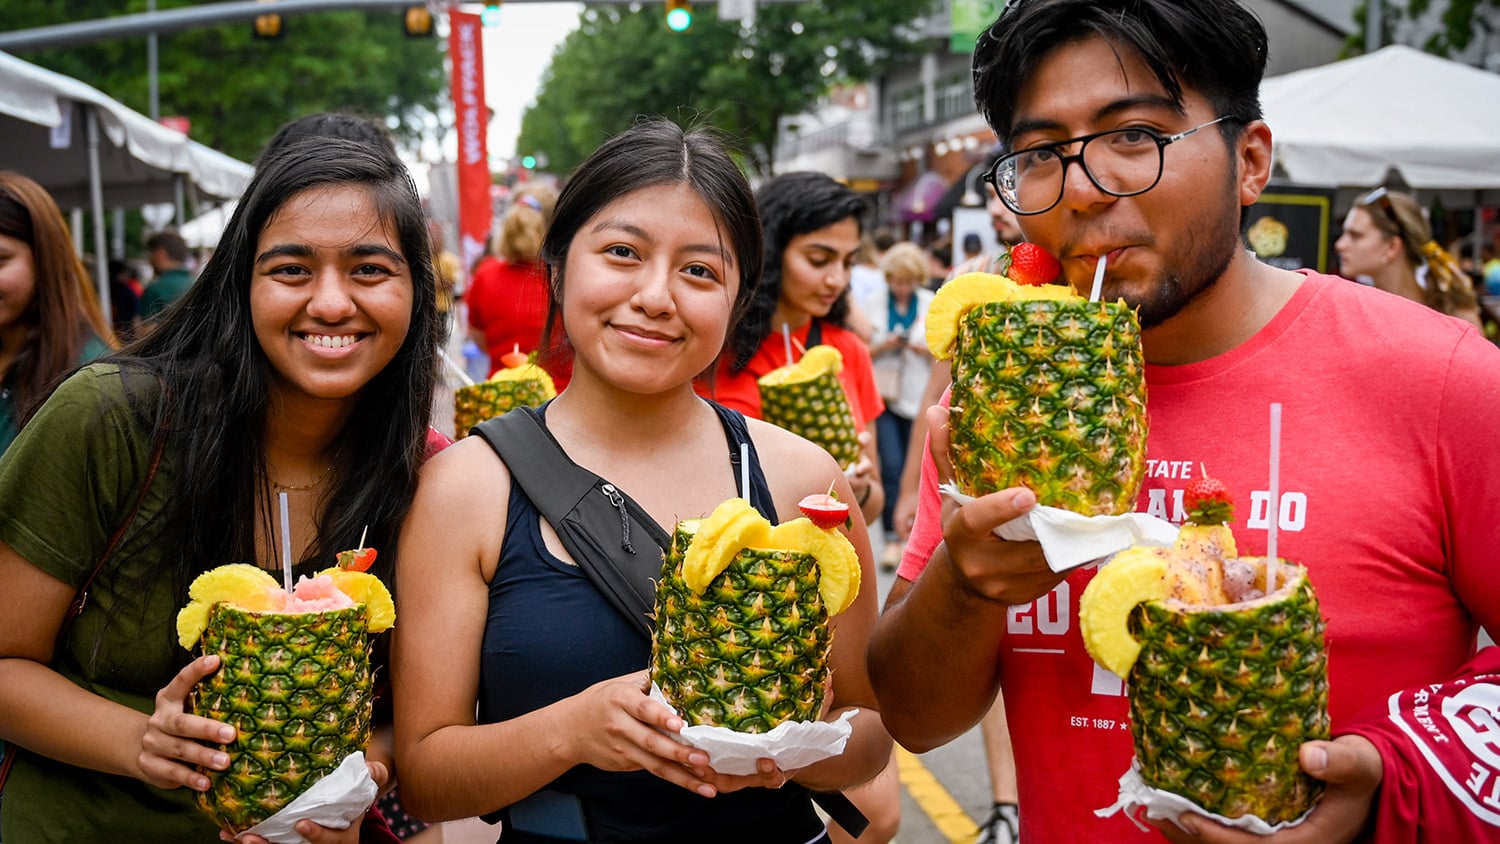 Students enjoyed refreshments from dozens of vendors, including a popular pineapple drink.